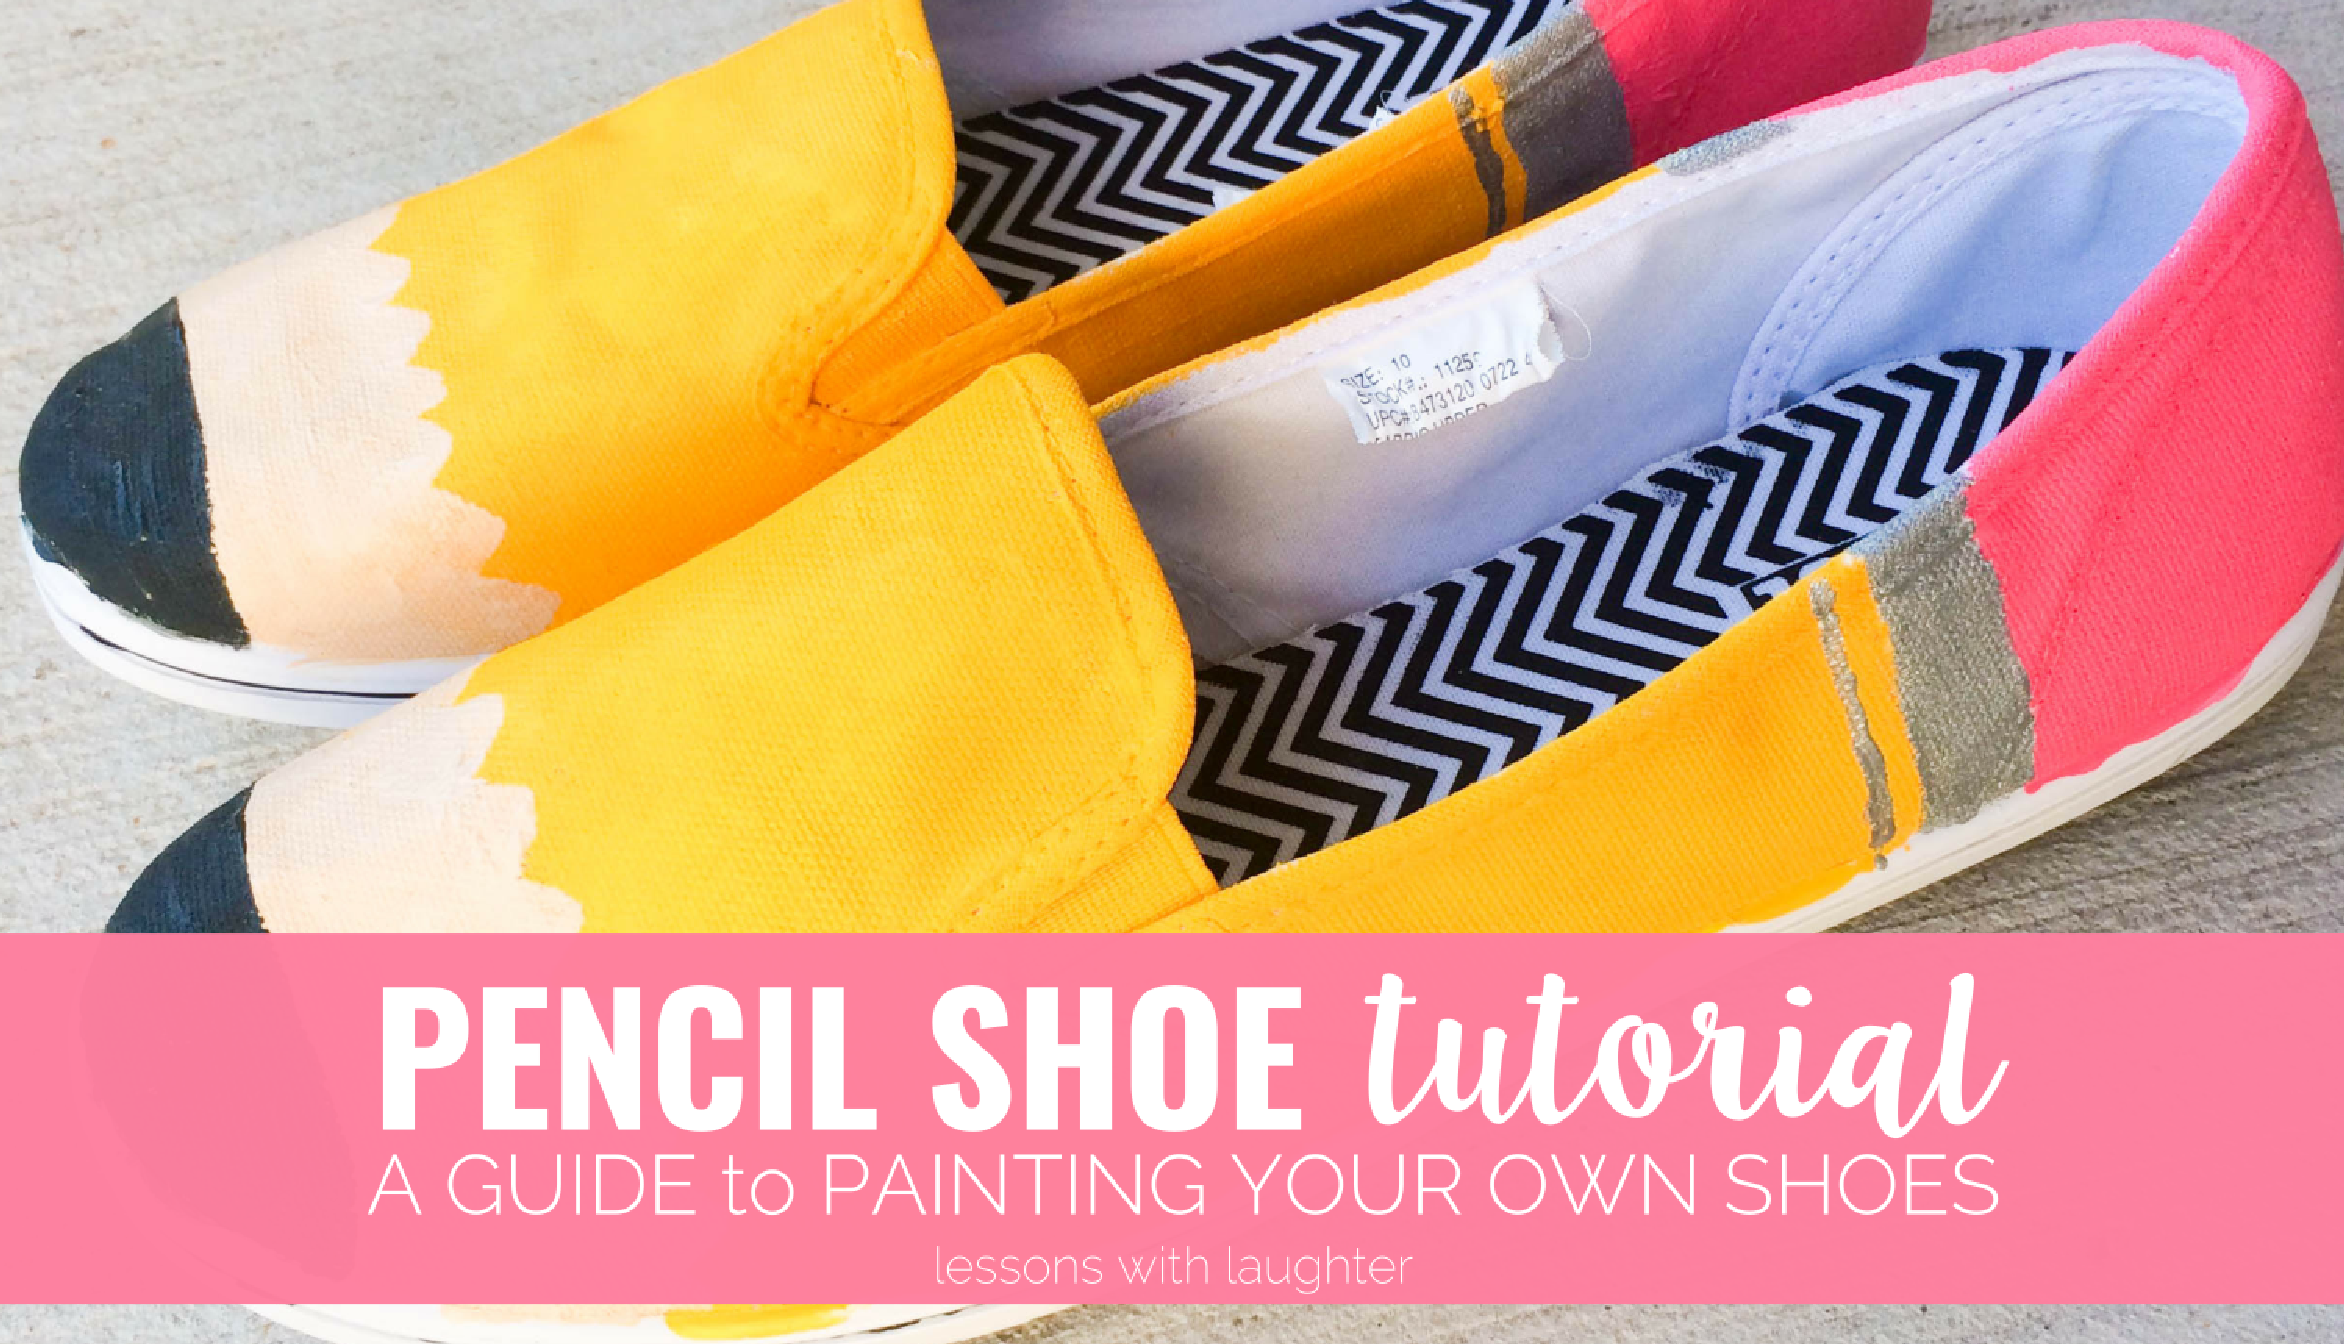 Pencil shoe tutorial for teachers who want to make fun shoes for school!